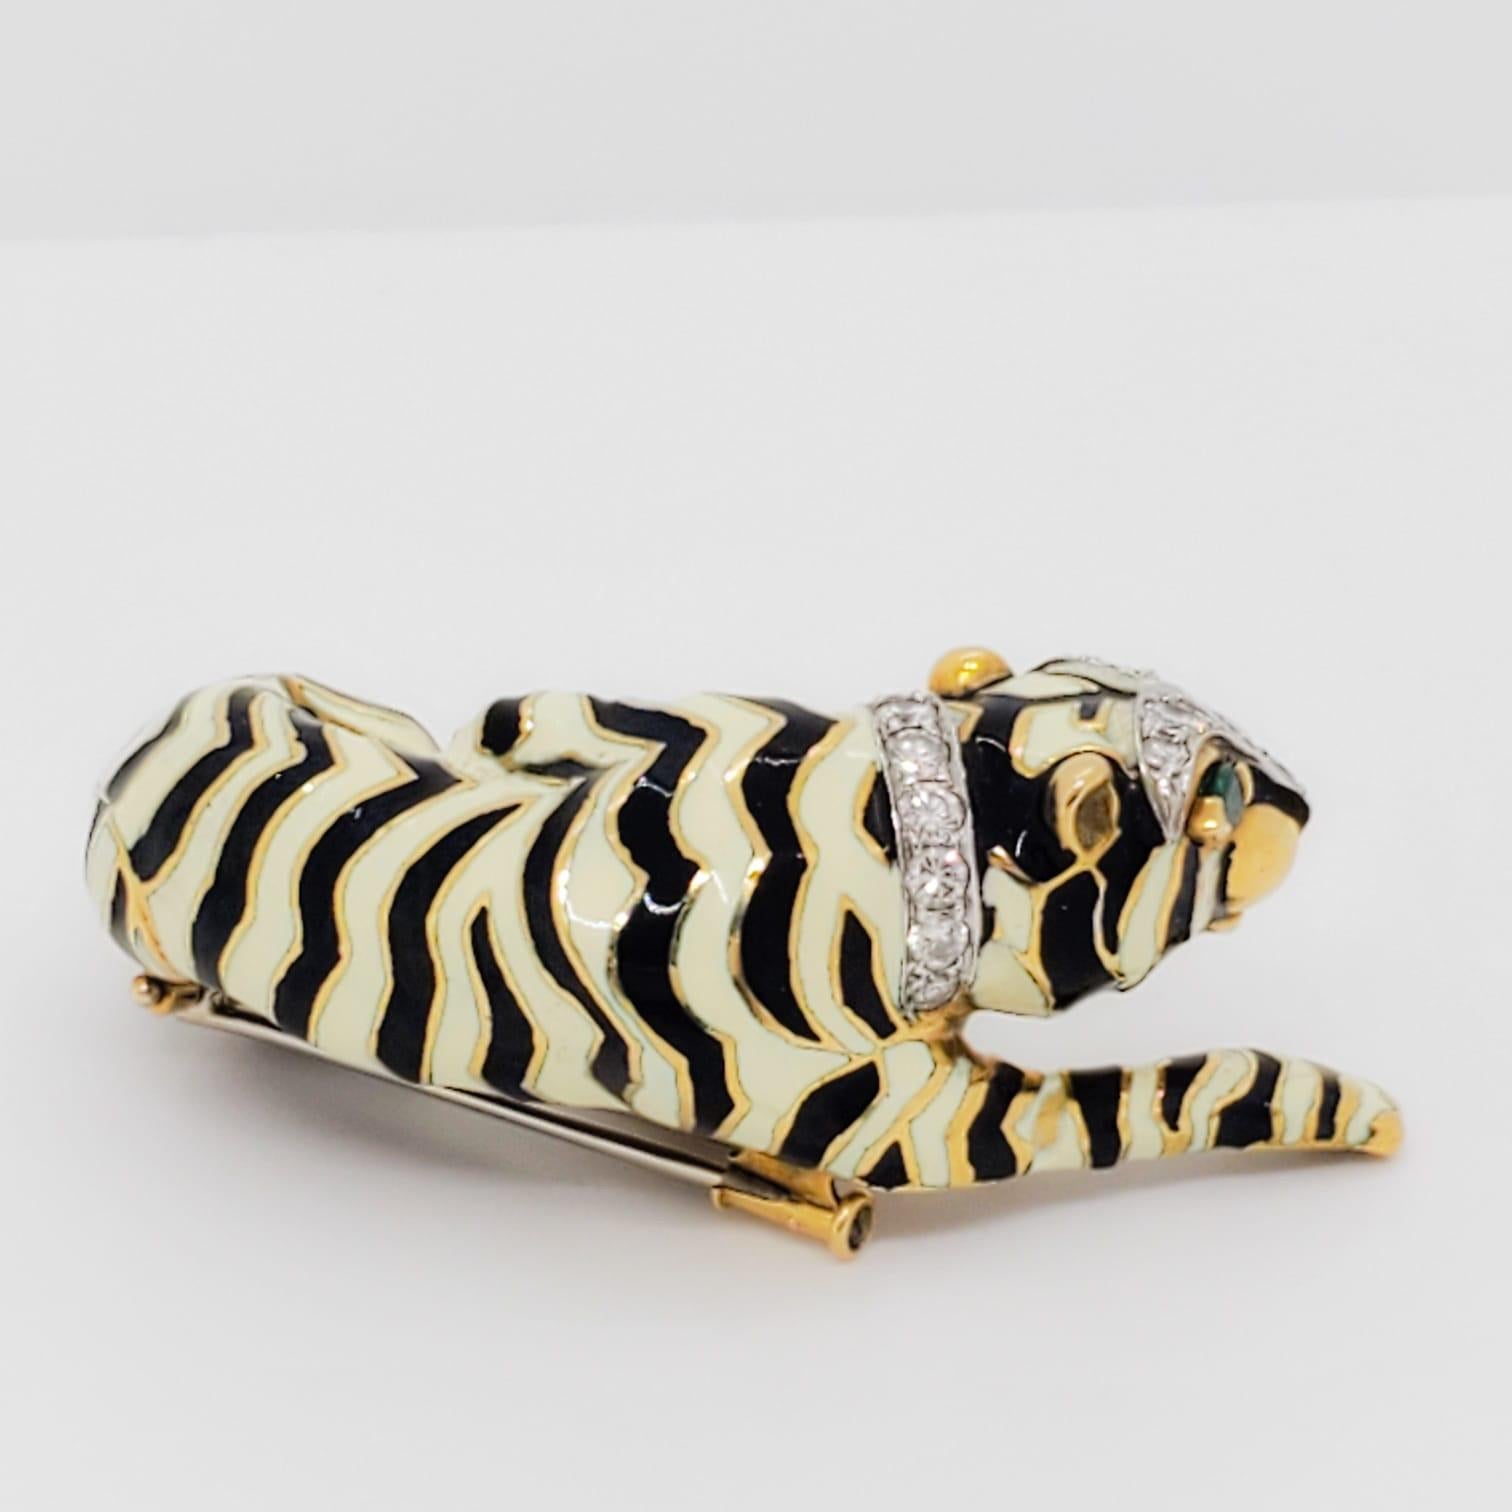 Absolutely stunning and rare collectible David Webb brooch with 1.00 ct good quality white diamond rounds and approximately 0.30-0.40 ct emeralds. This tiger is rare because it is black and white and also has a diamond collar. Extremely sought after